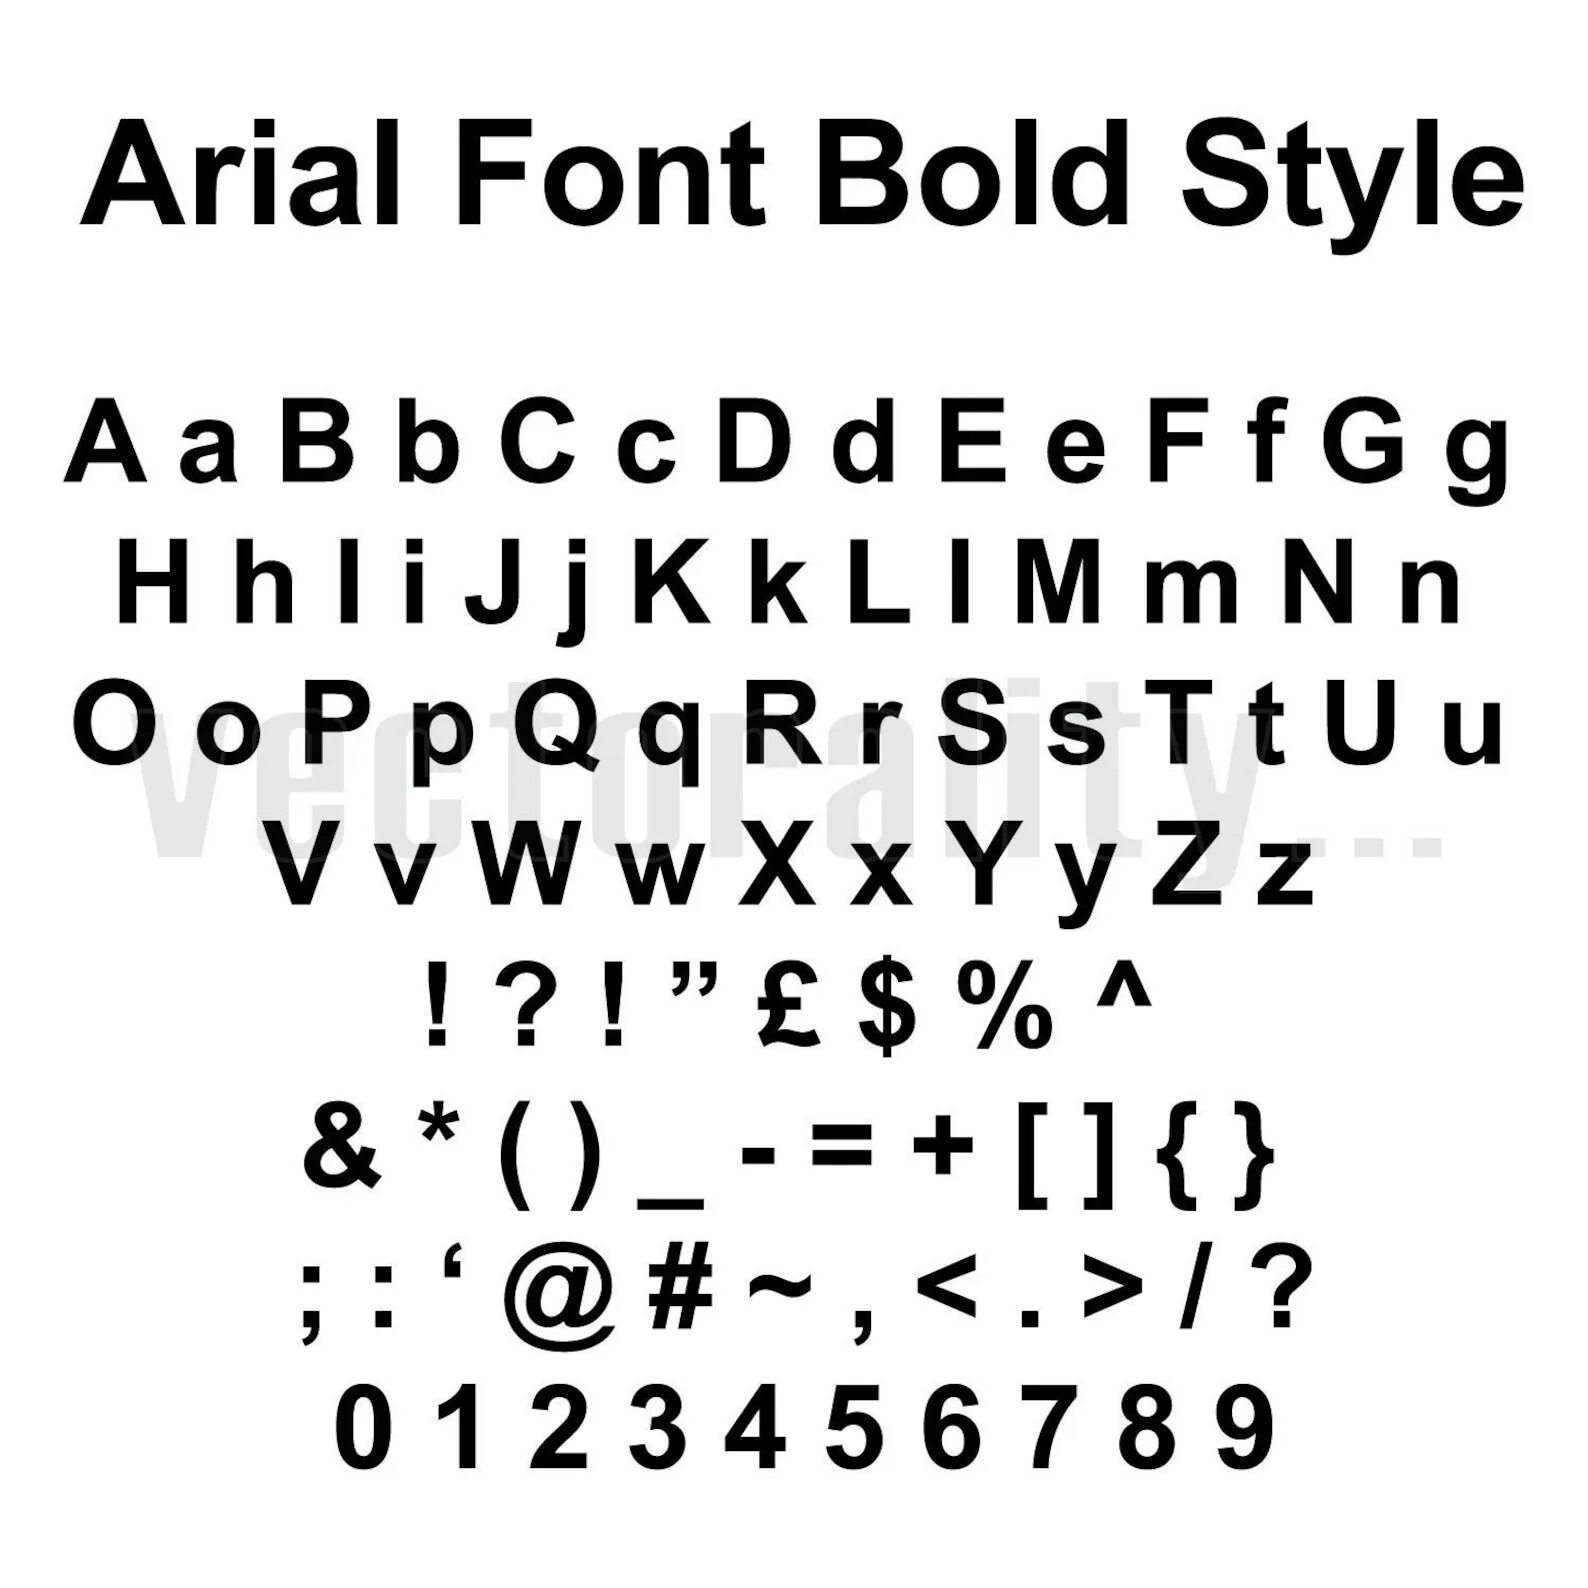 Шрифт arial 3. Arial шрифт. Шрифт arial Regular. Шрифт arial rounded. Полужирный шрифт arial.